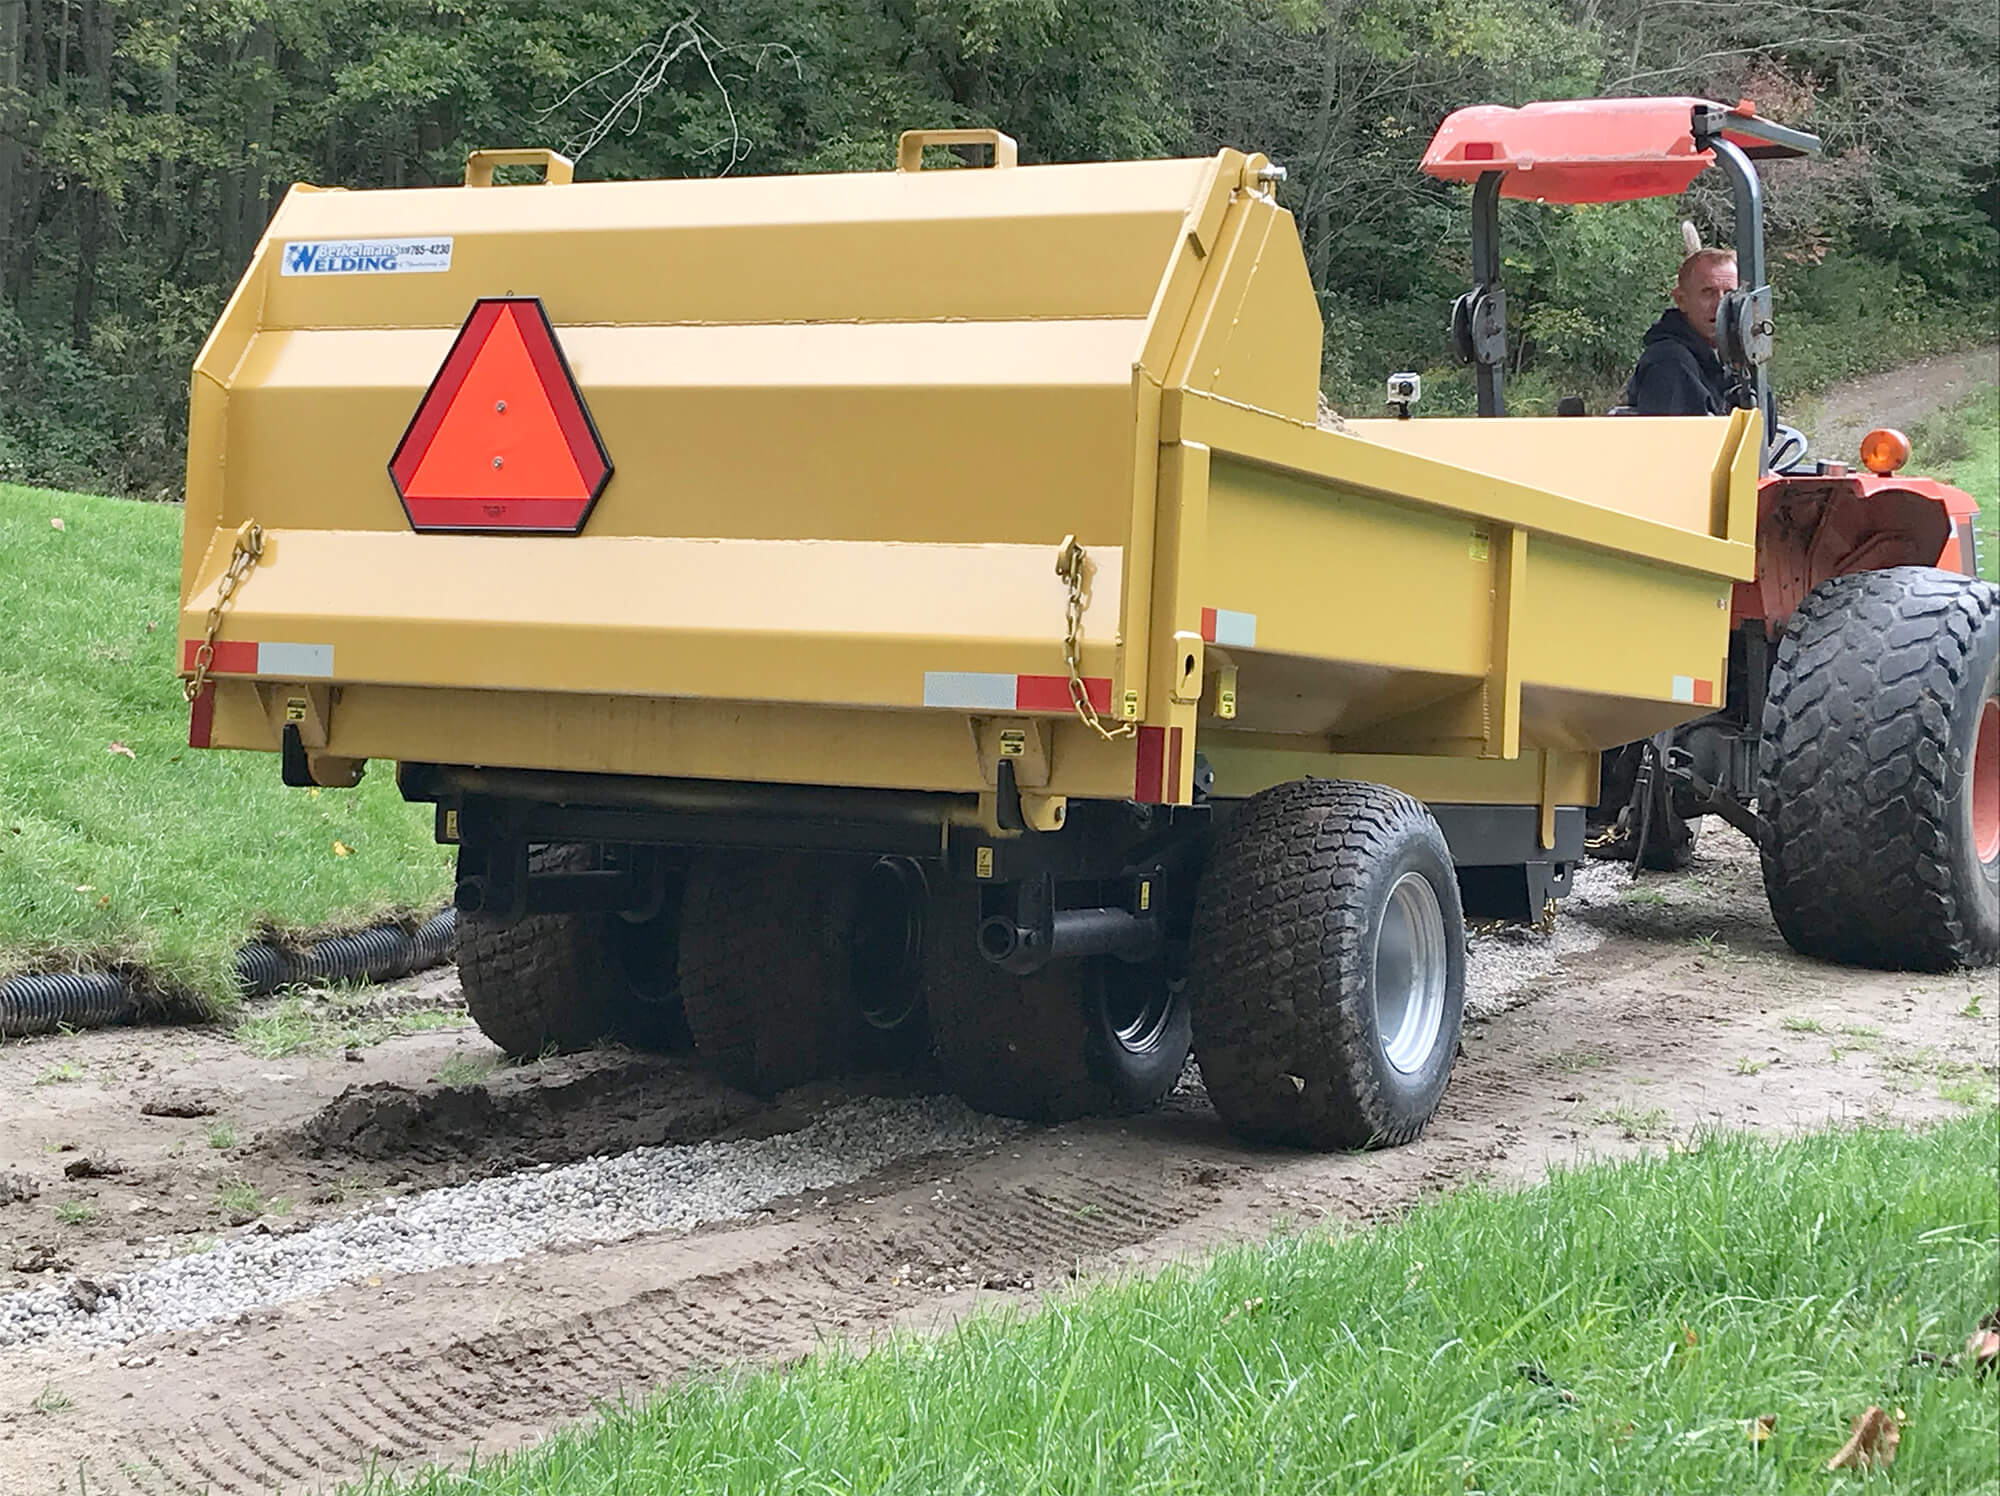 an image of the back of the 5 ton turf dumper trailer